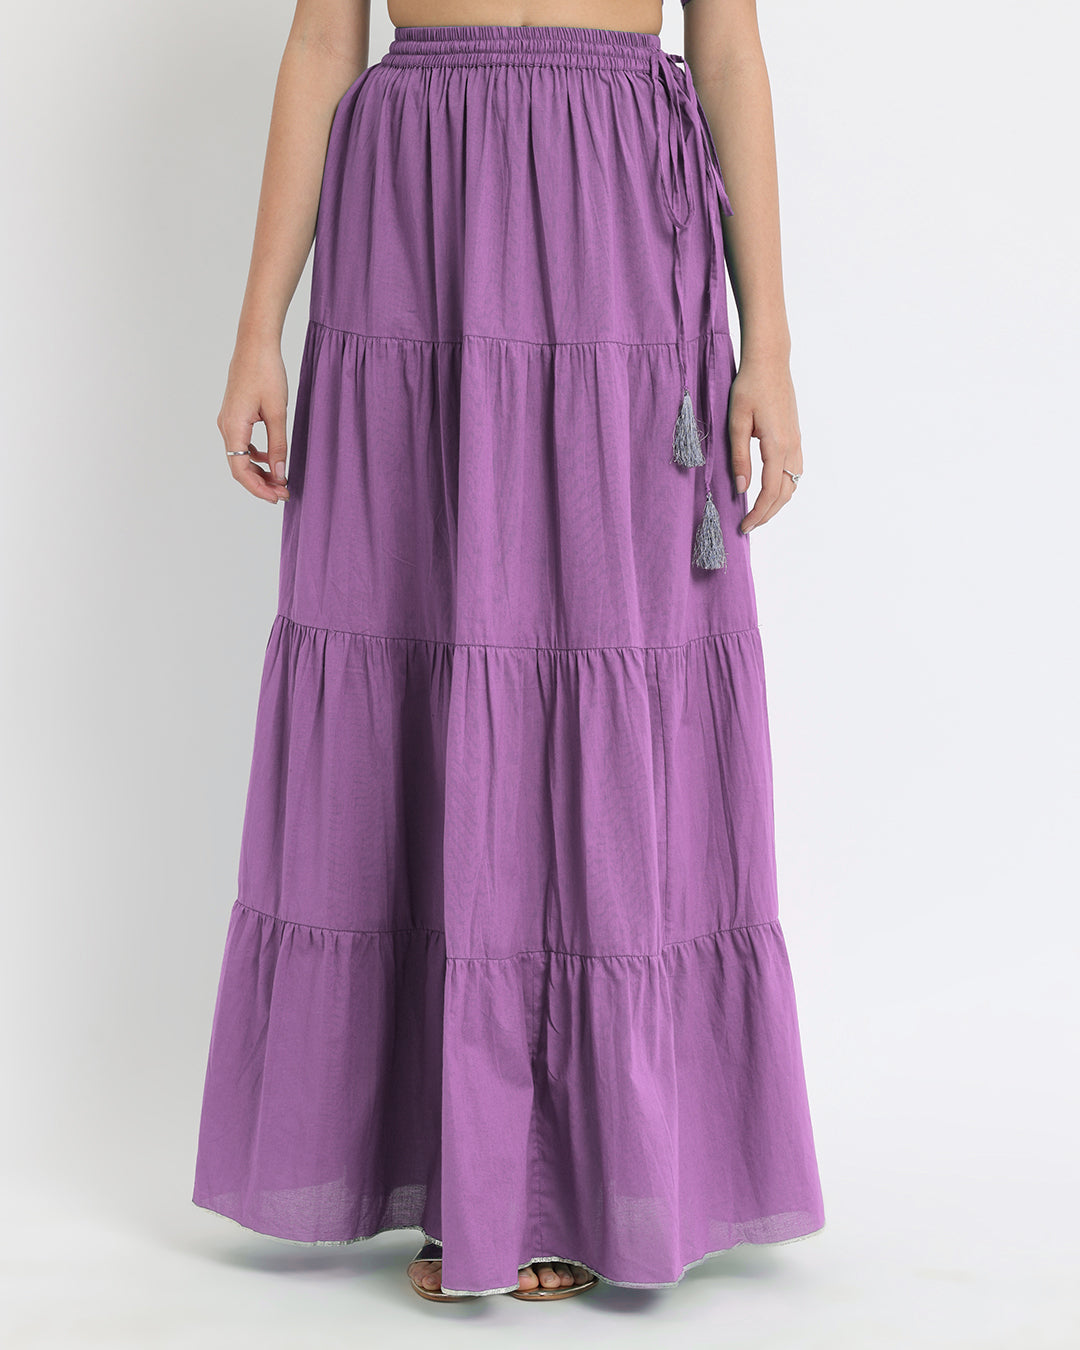 Wisteria Purple Tiered Lace Skirt